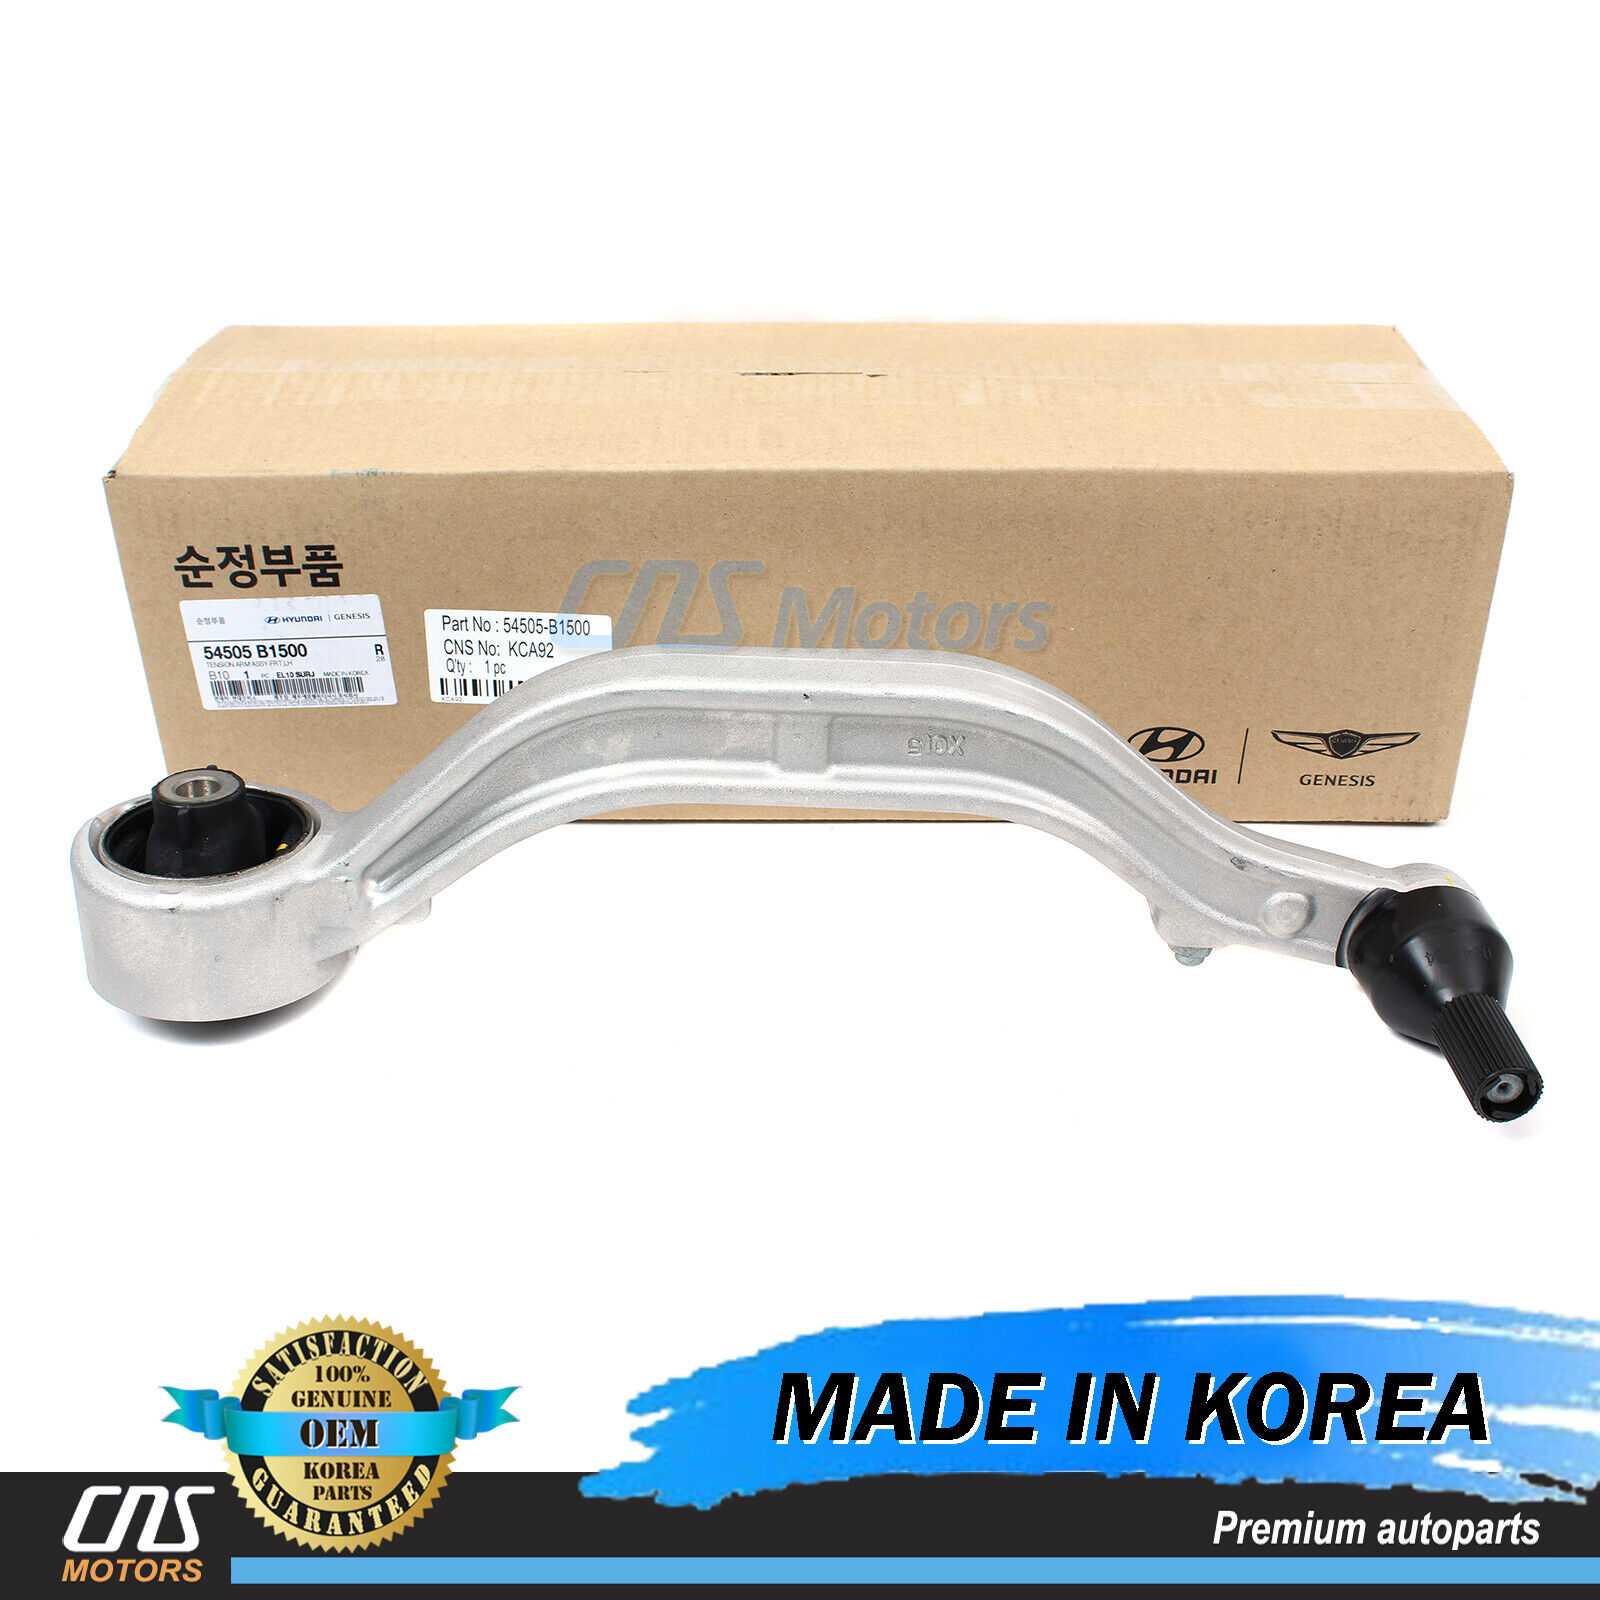 ⭐GENUINE⭐ Control Arm Lower FRONT LEFT for 2015-2020 Genesis G80 AWD 54505B1500